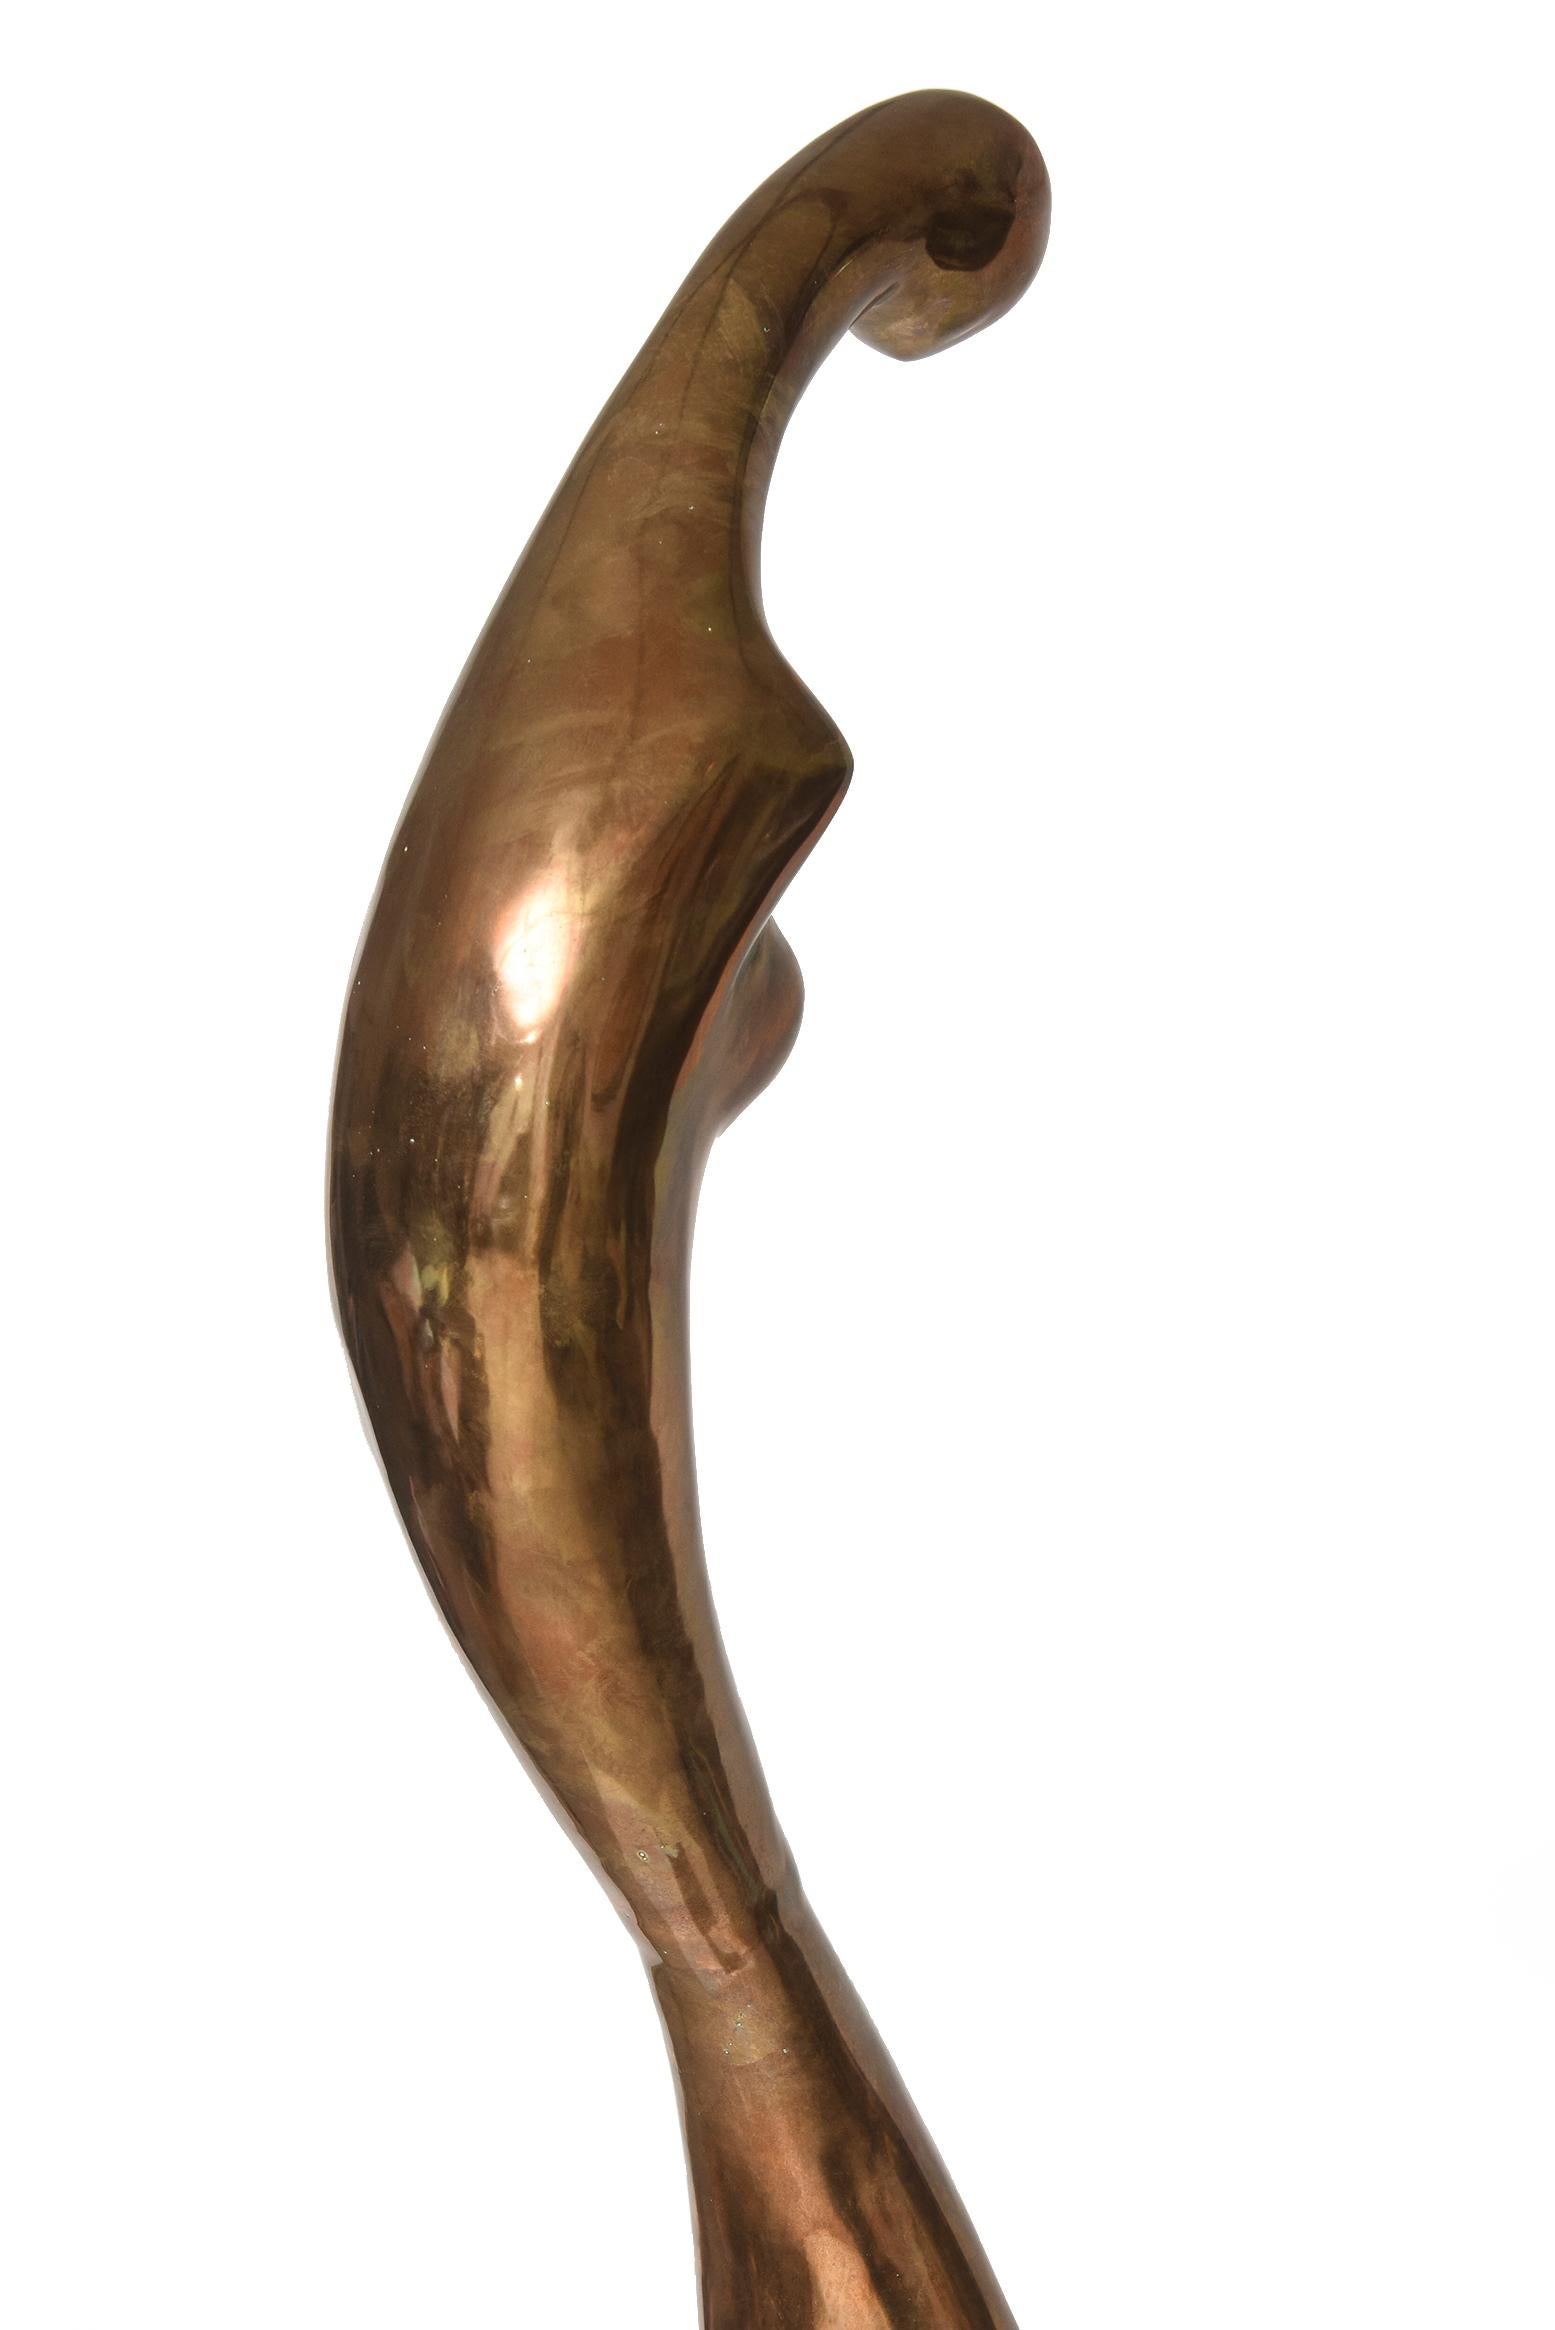 20th Century Manuel Carbonell Limited Edition Simple Form Figure Bronze Sculpture, circa 1976 For Sale